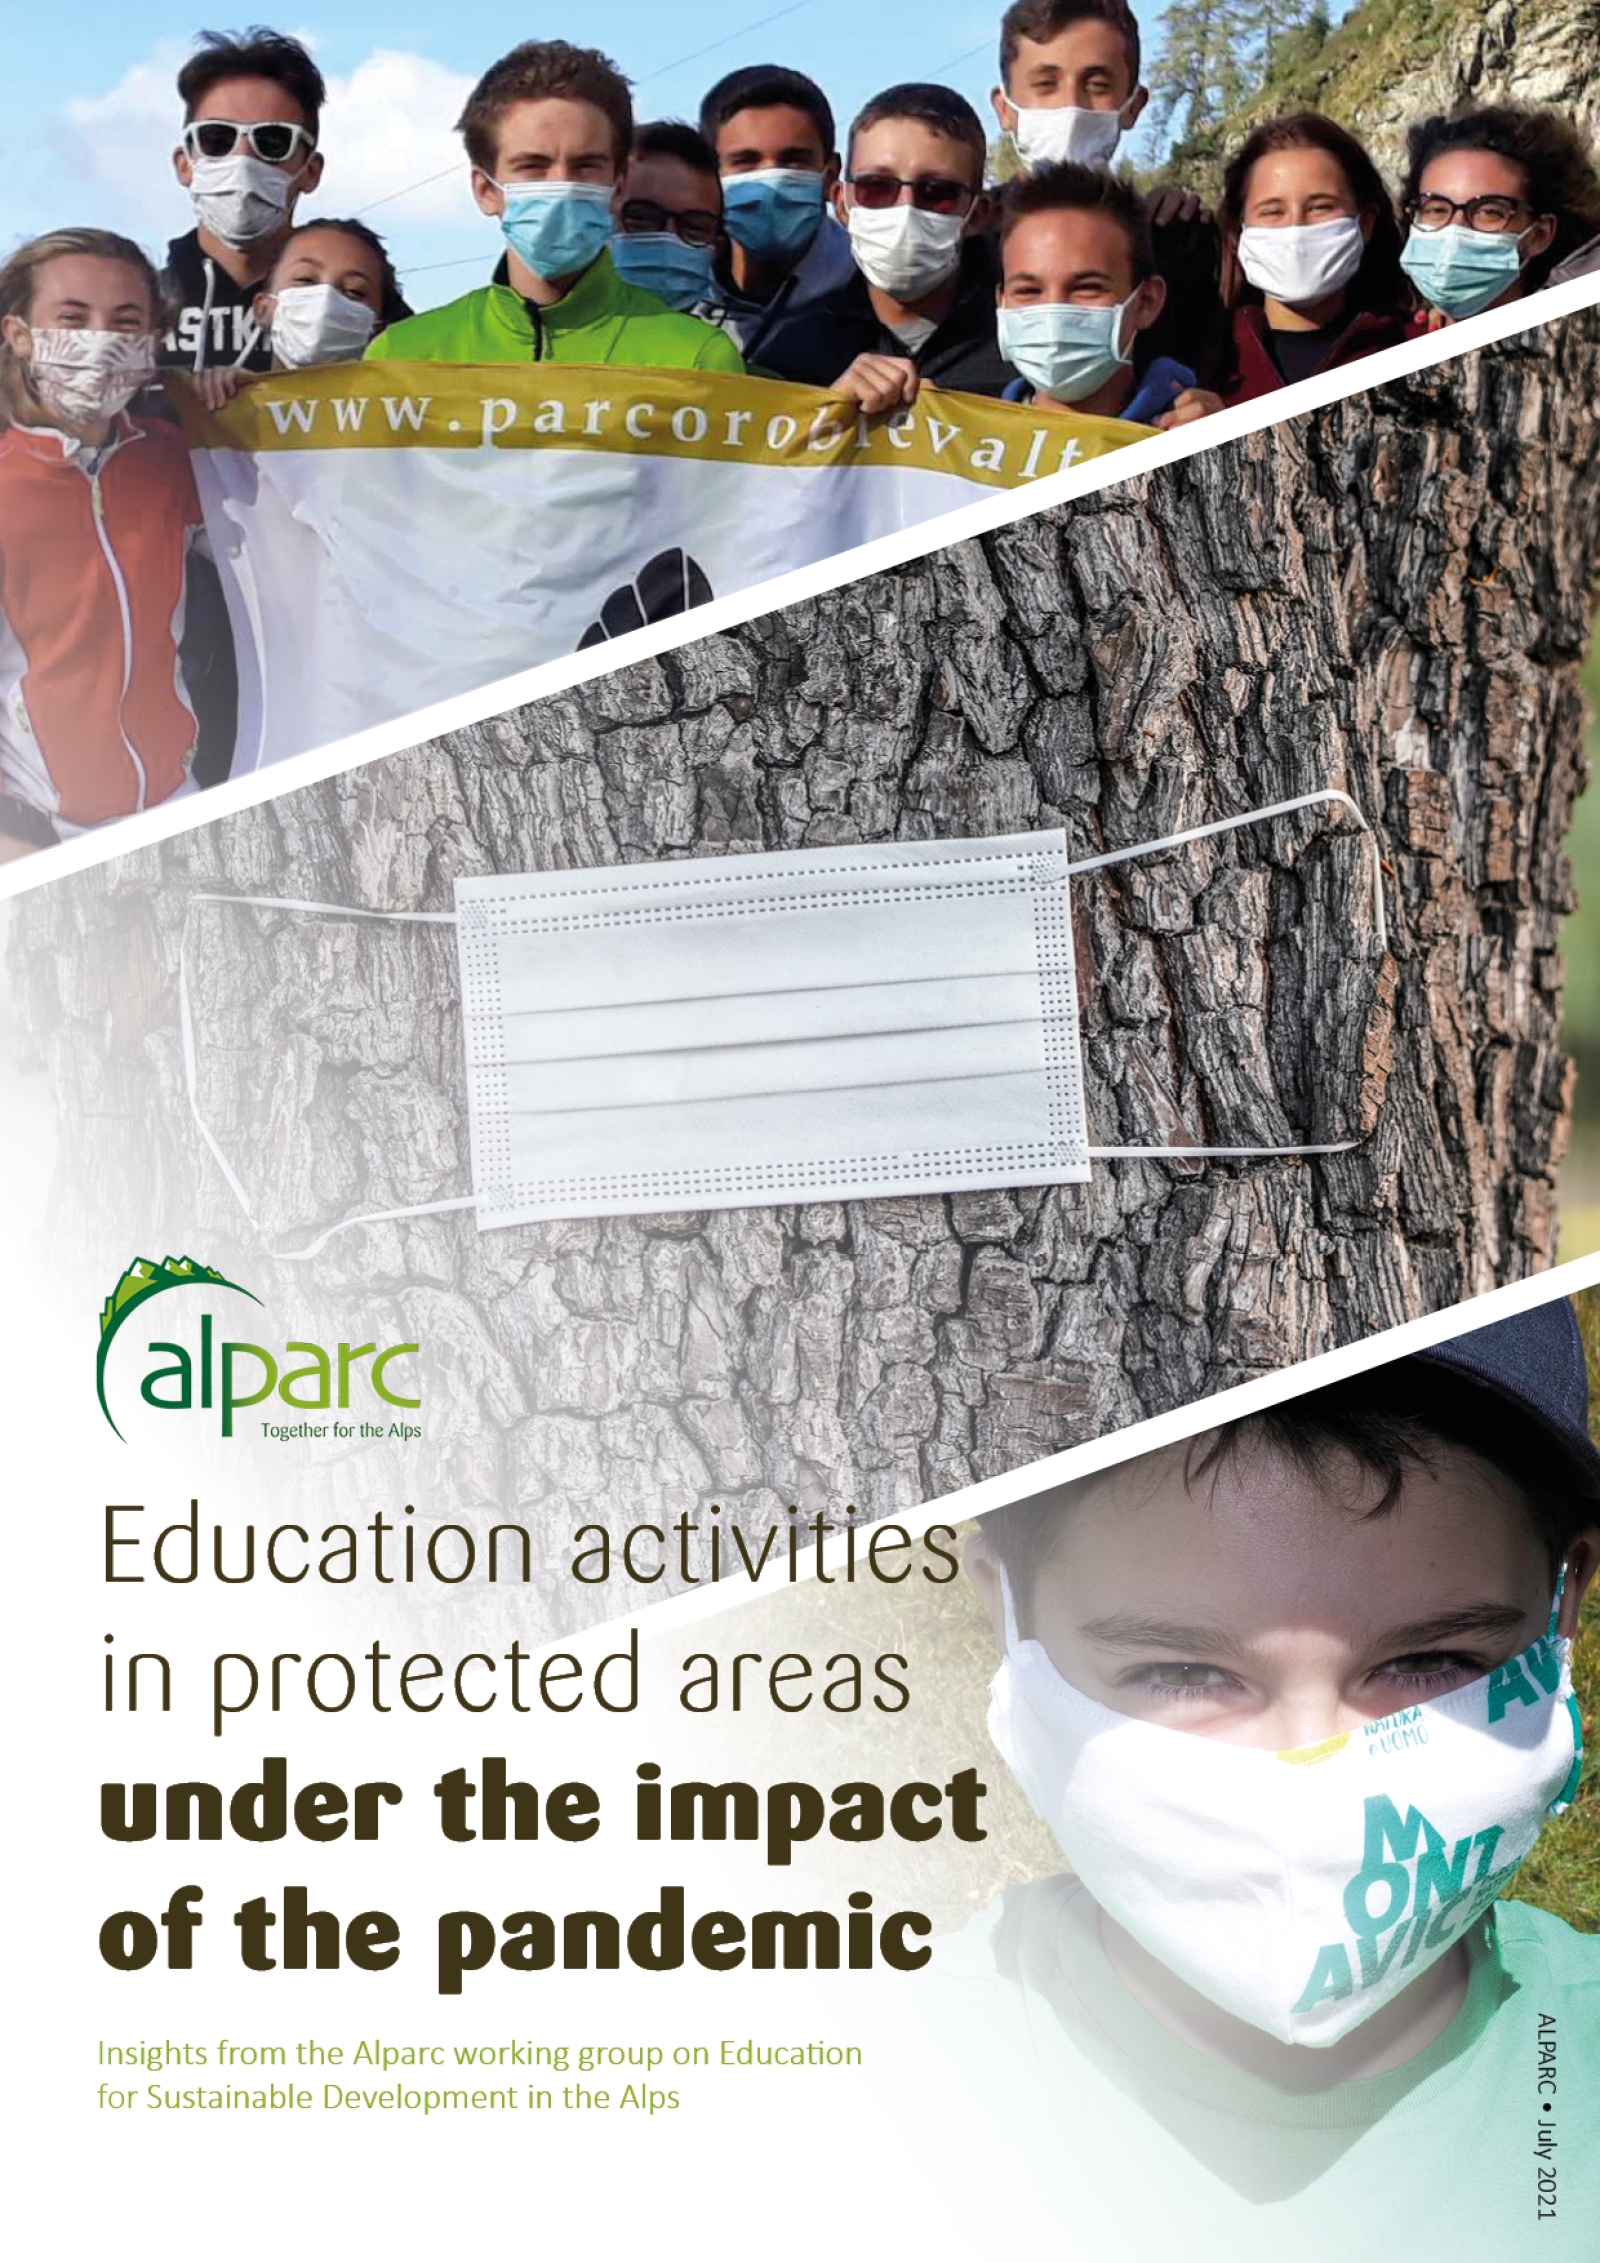 Education activities in protected areas under the impact of the pandemic